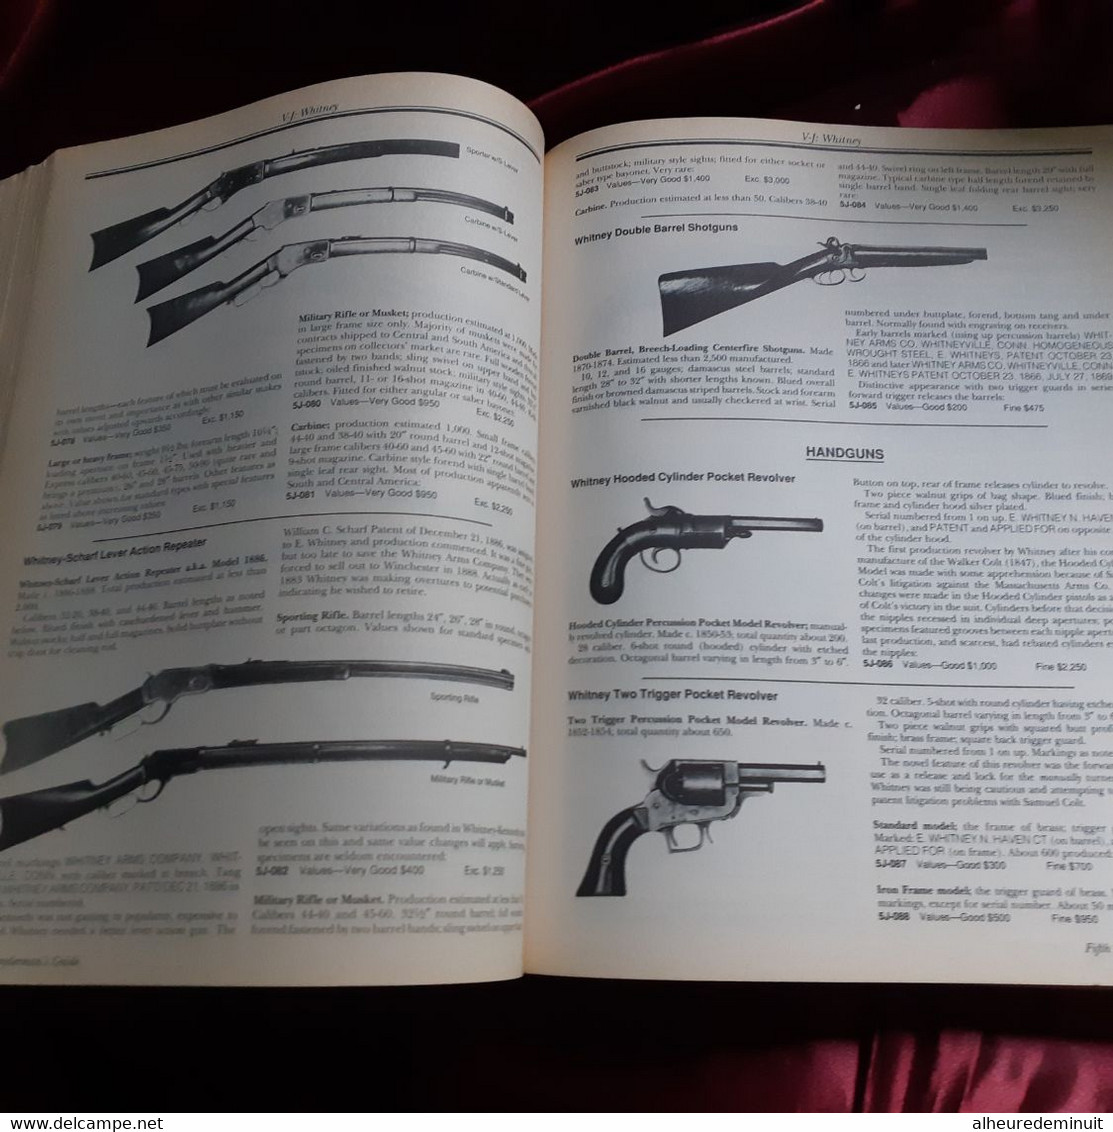 Flayderman's Guide To Antique American Firearms"1990"Armes"fusils"révolvers"complete Handbook Of American Gun Collecting - US Army